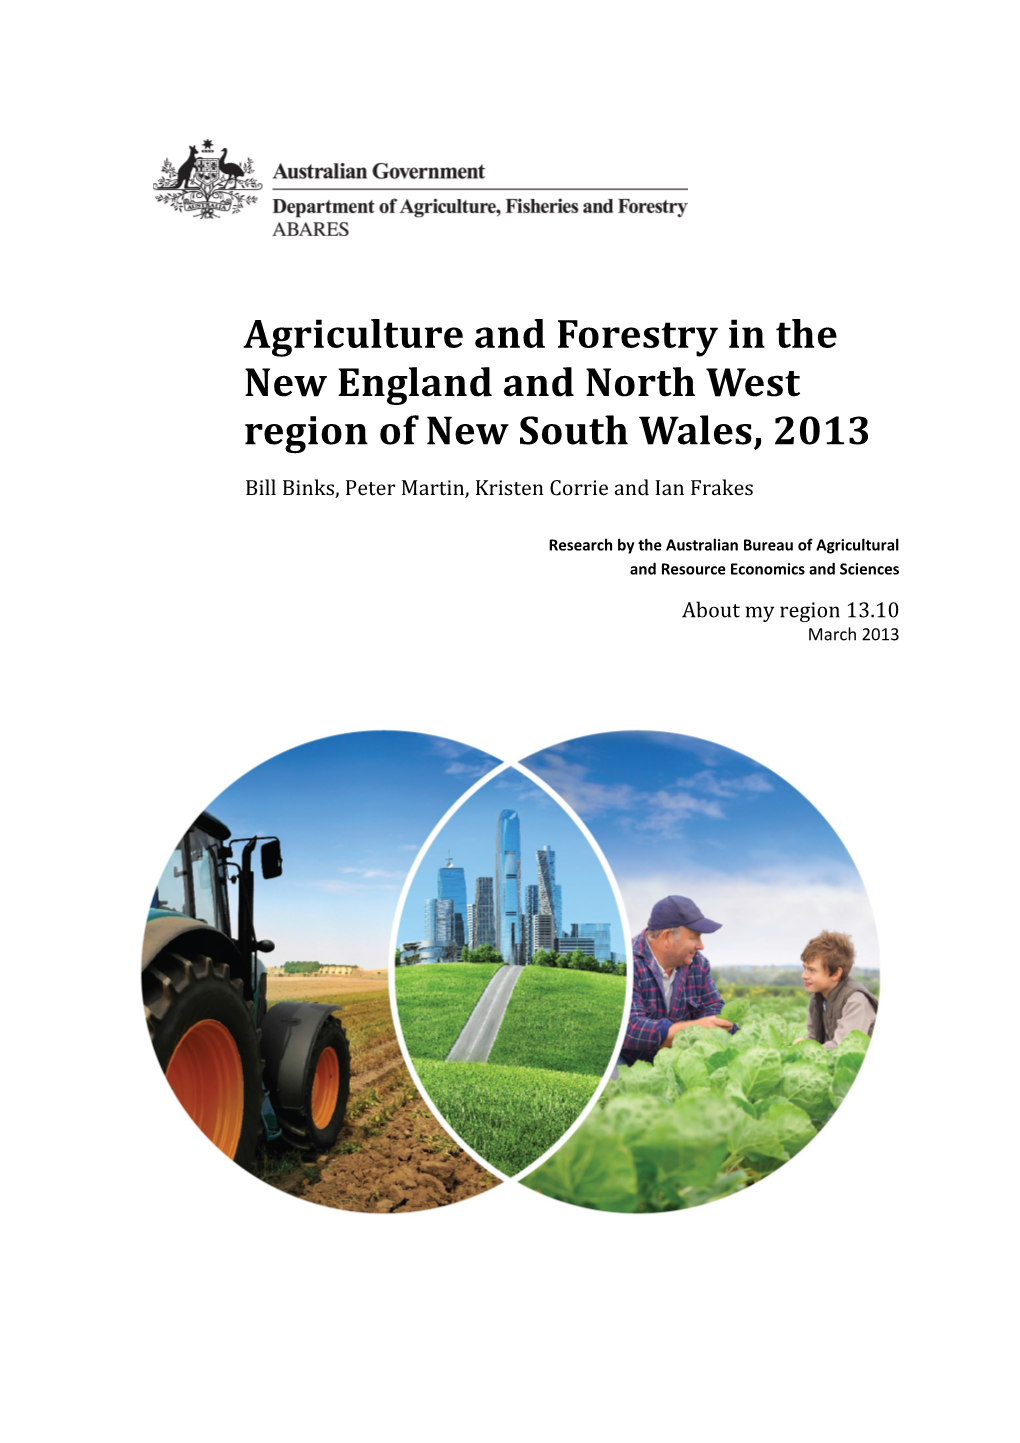 Agriculture and Forestry in the New England and North West Region of New South Wales, 2013